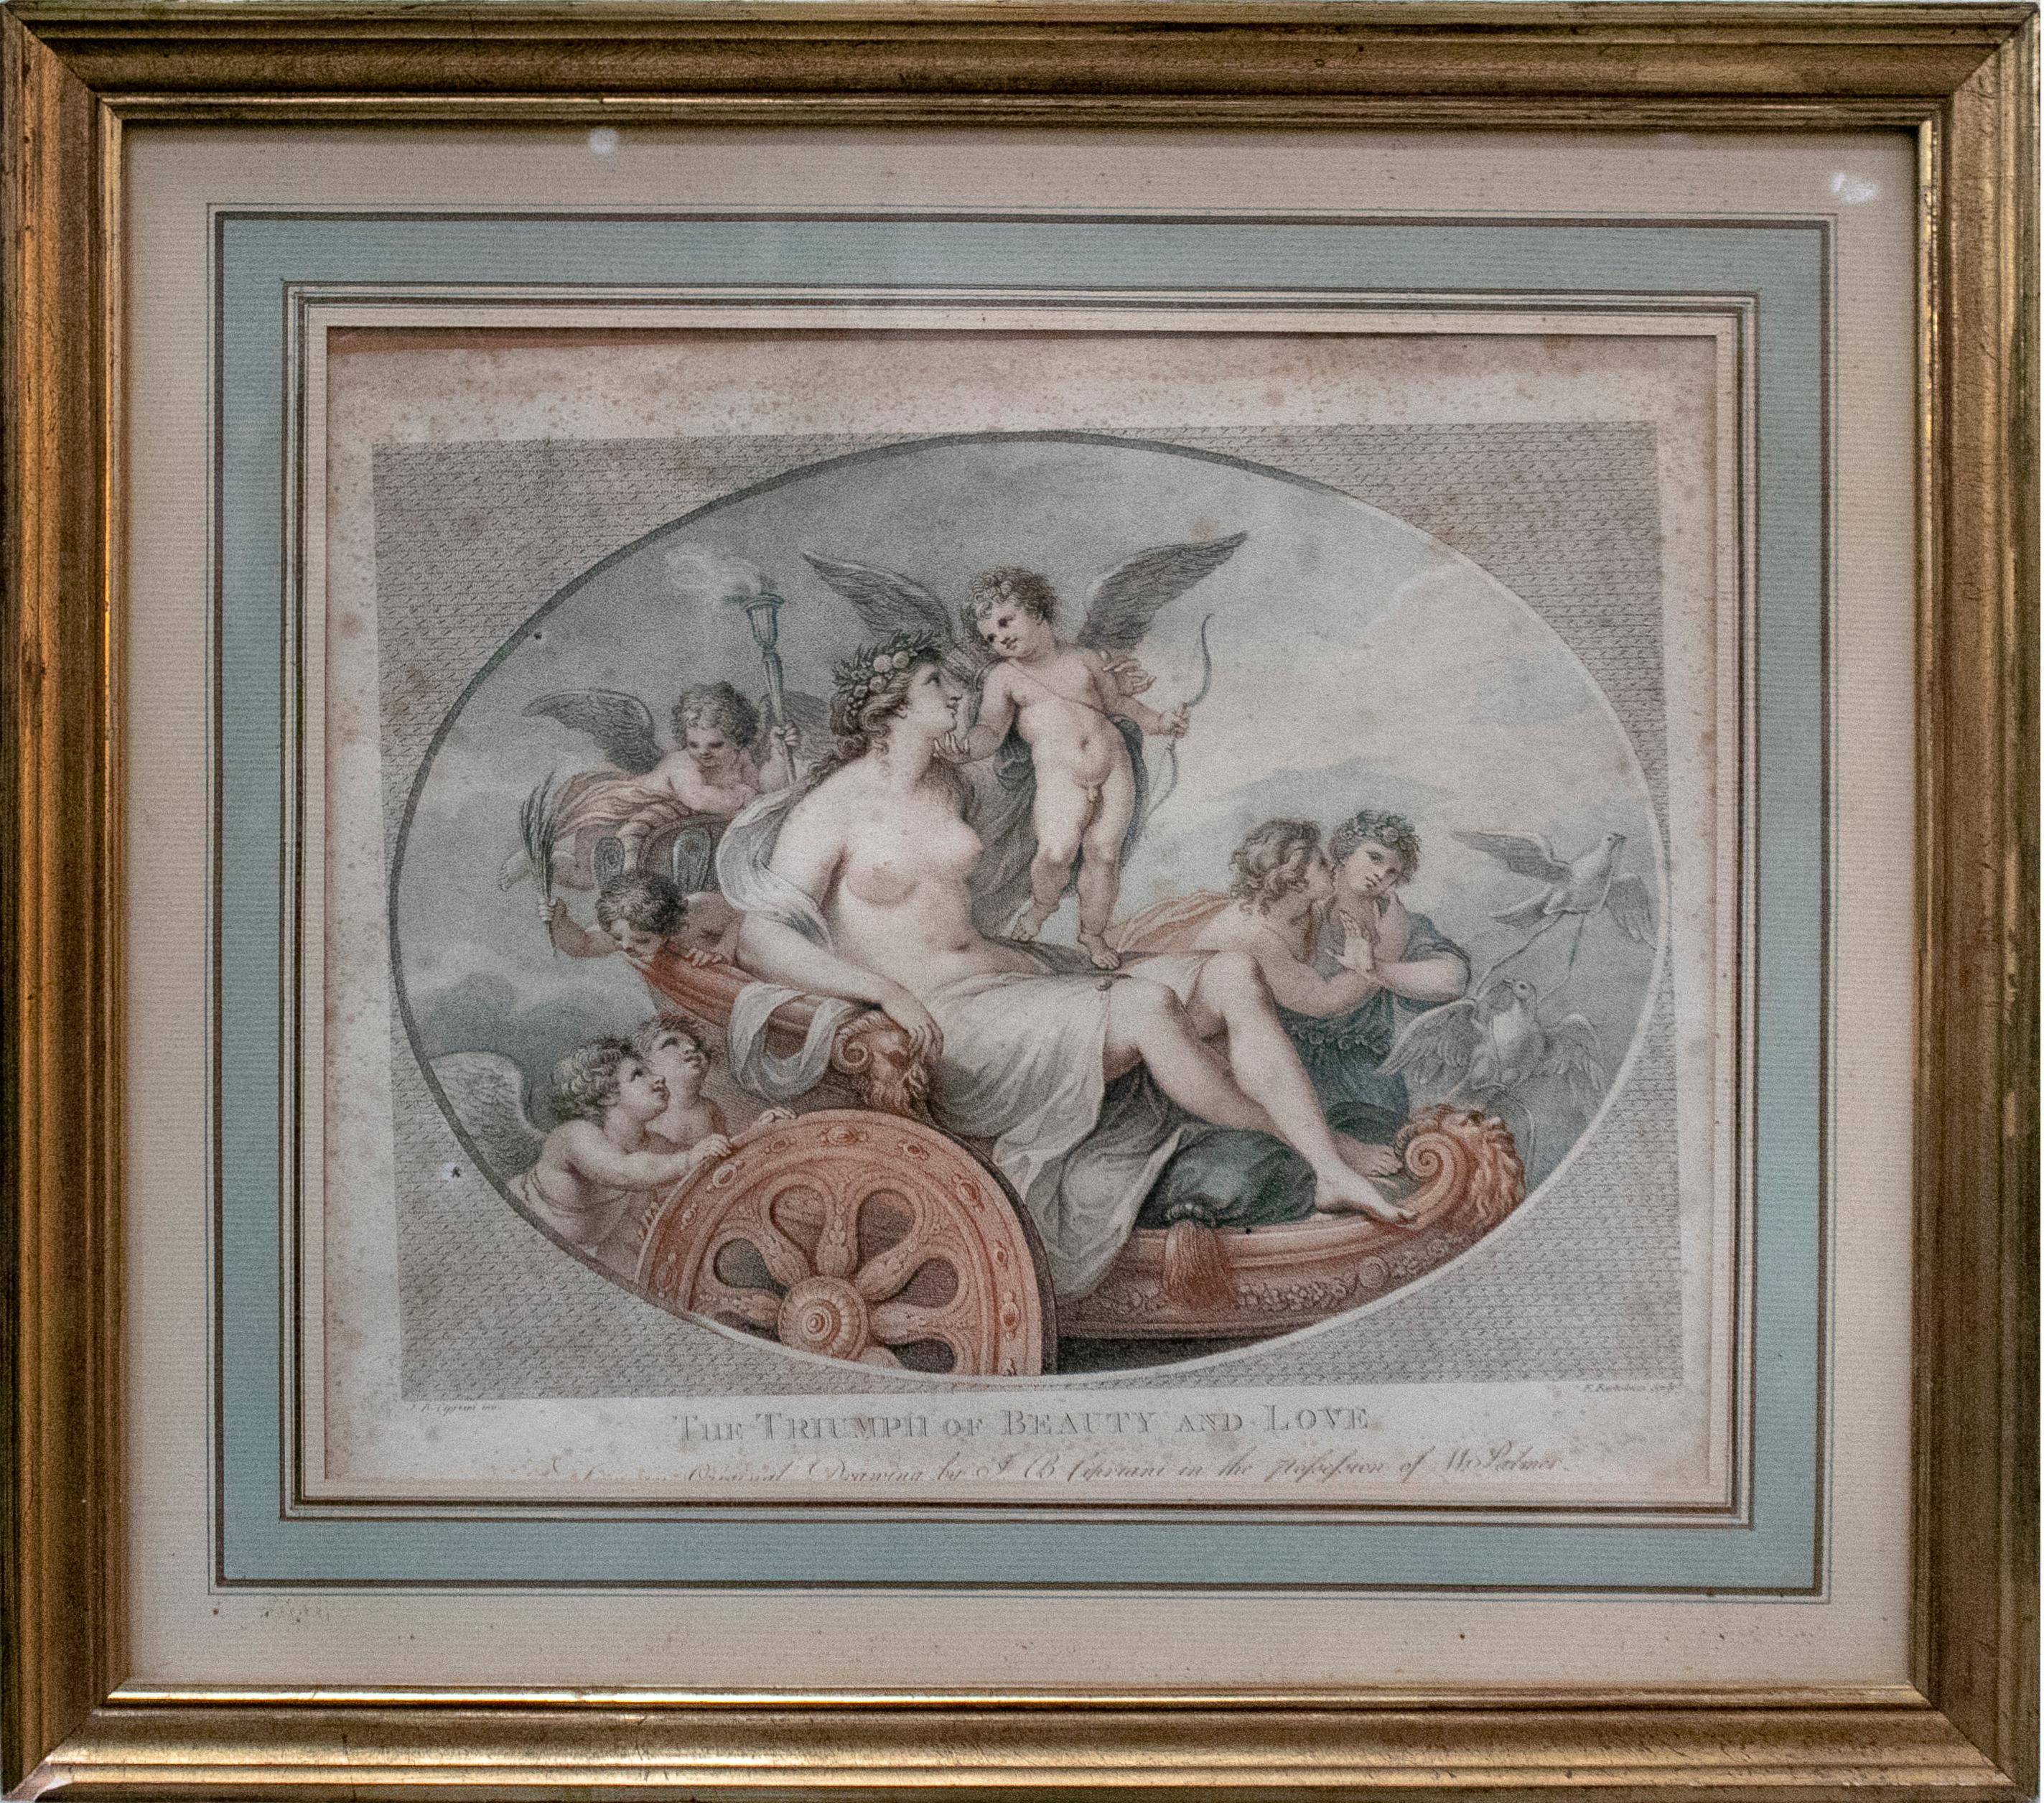 19th Century pair of French engravings.

Dimensions for each.

Dimensions with frame: 37 x 41.5 x 1.5cm.